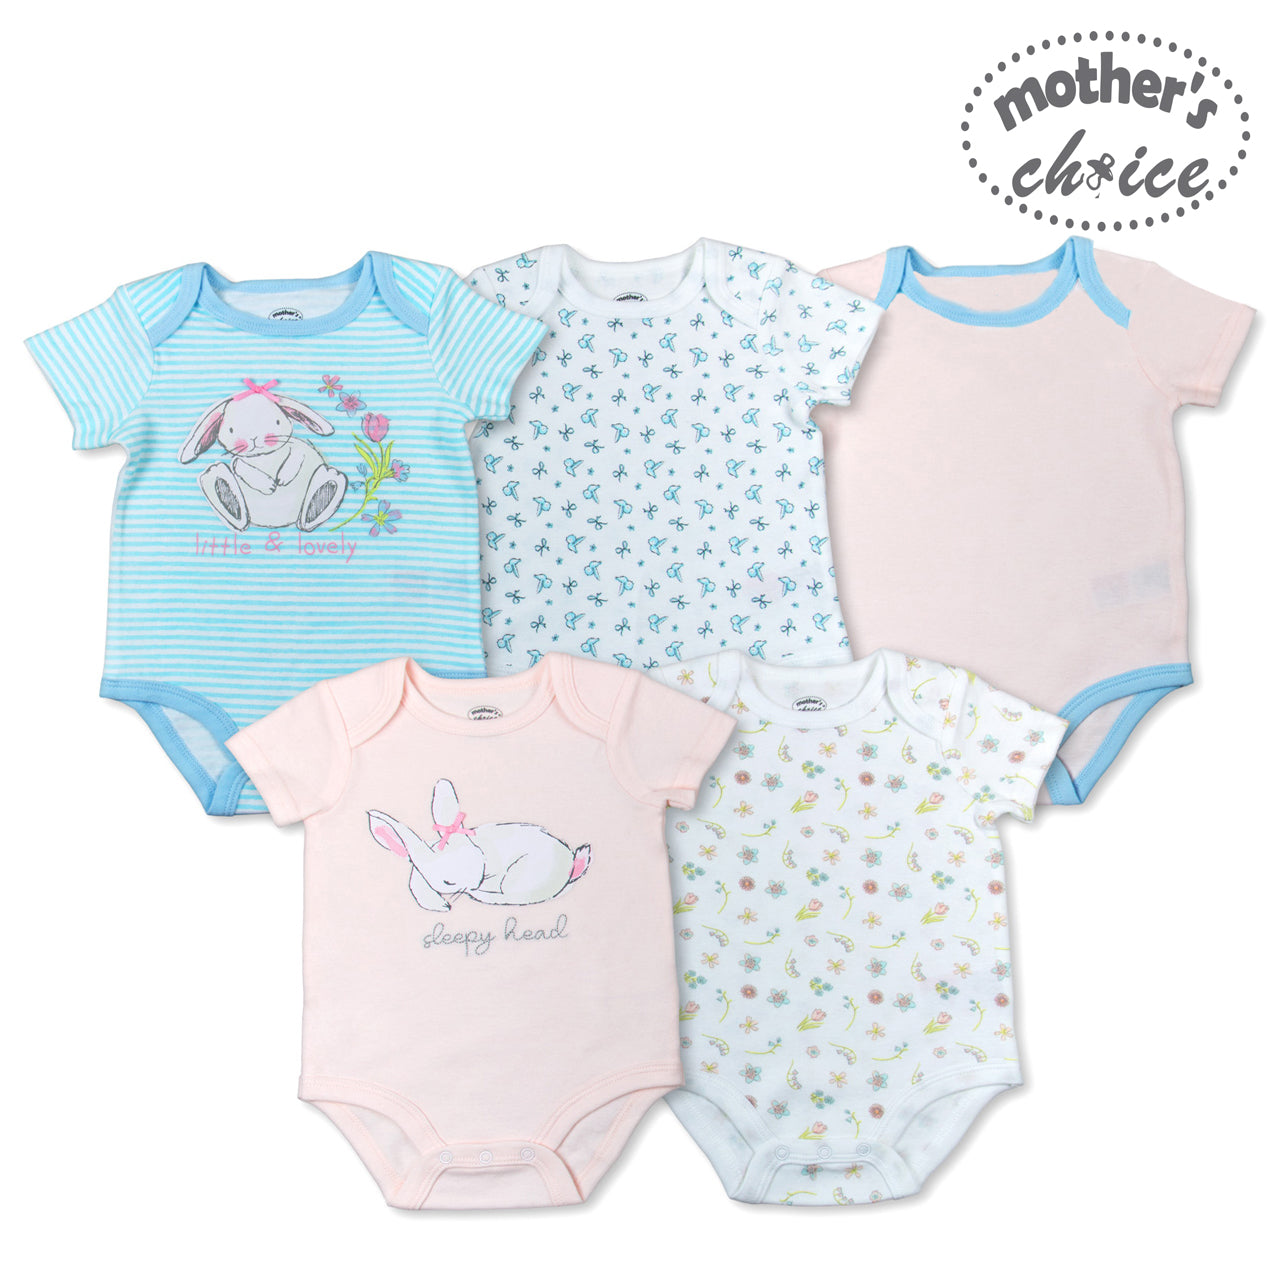 Mother's Choice 5 Pack Short Sleeve Onesie (Little & Lonely/IT2495)